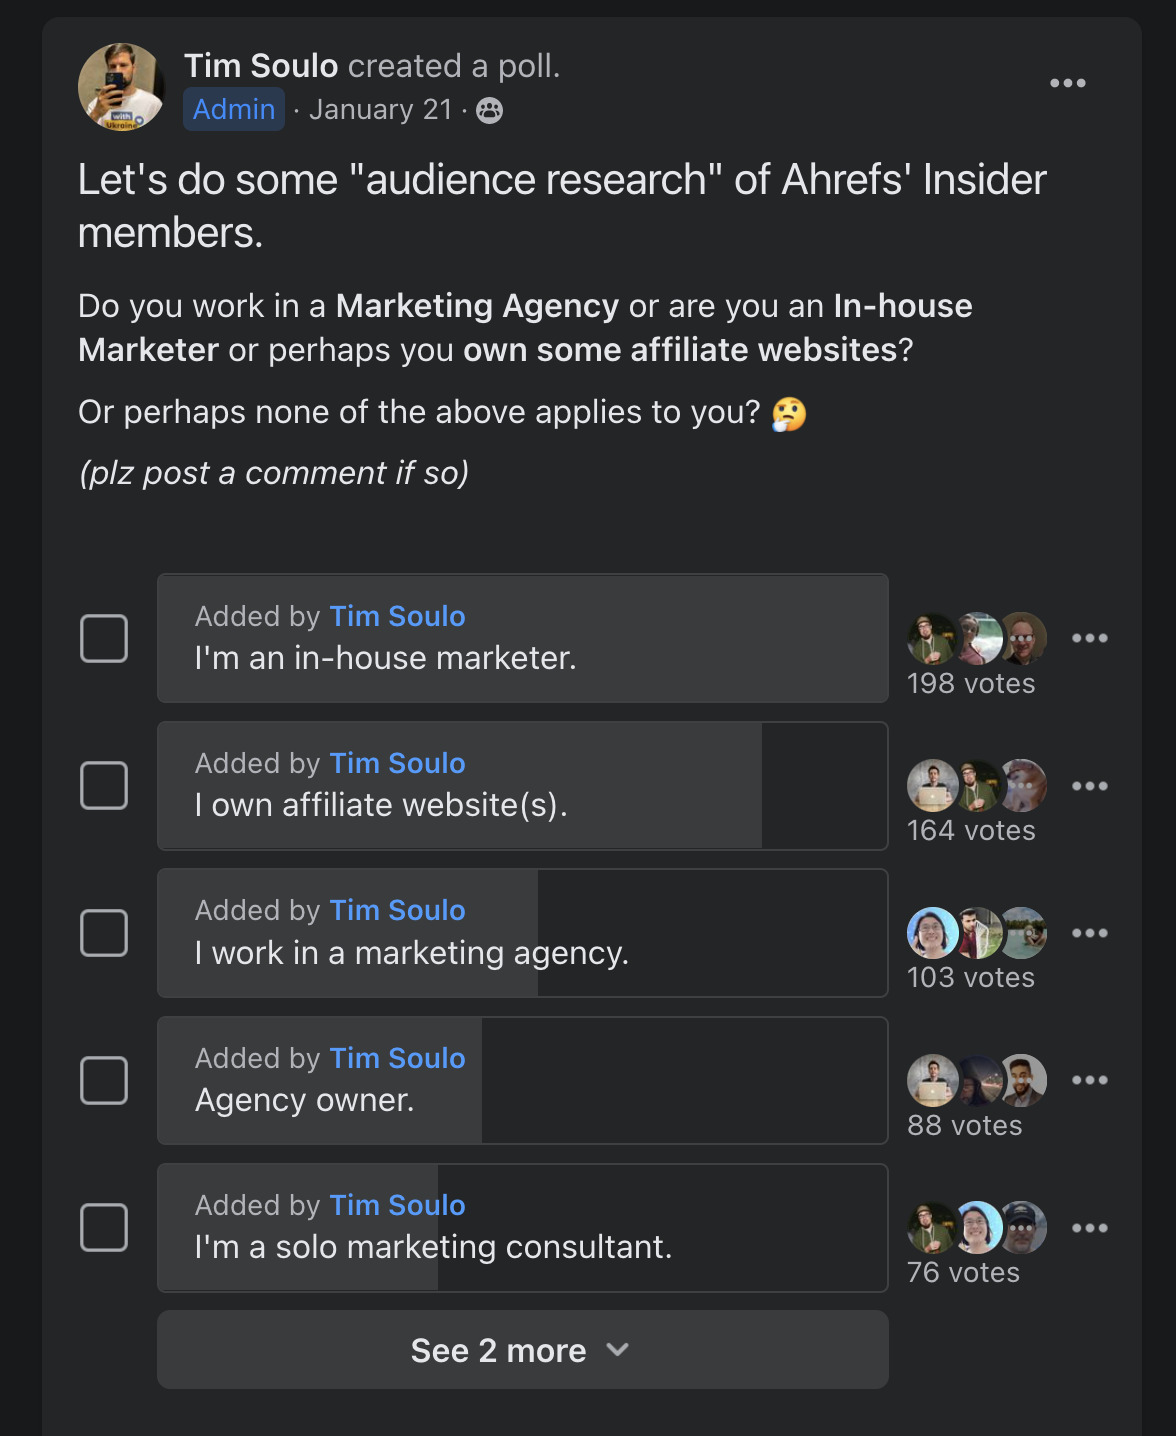 Tim's poll in Ahrefs Insider asking members who they are (in-house marketer, affiliate website owner, etc) 